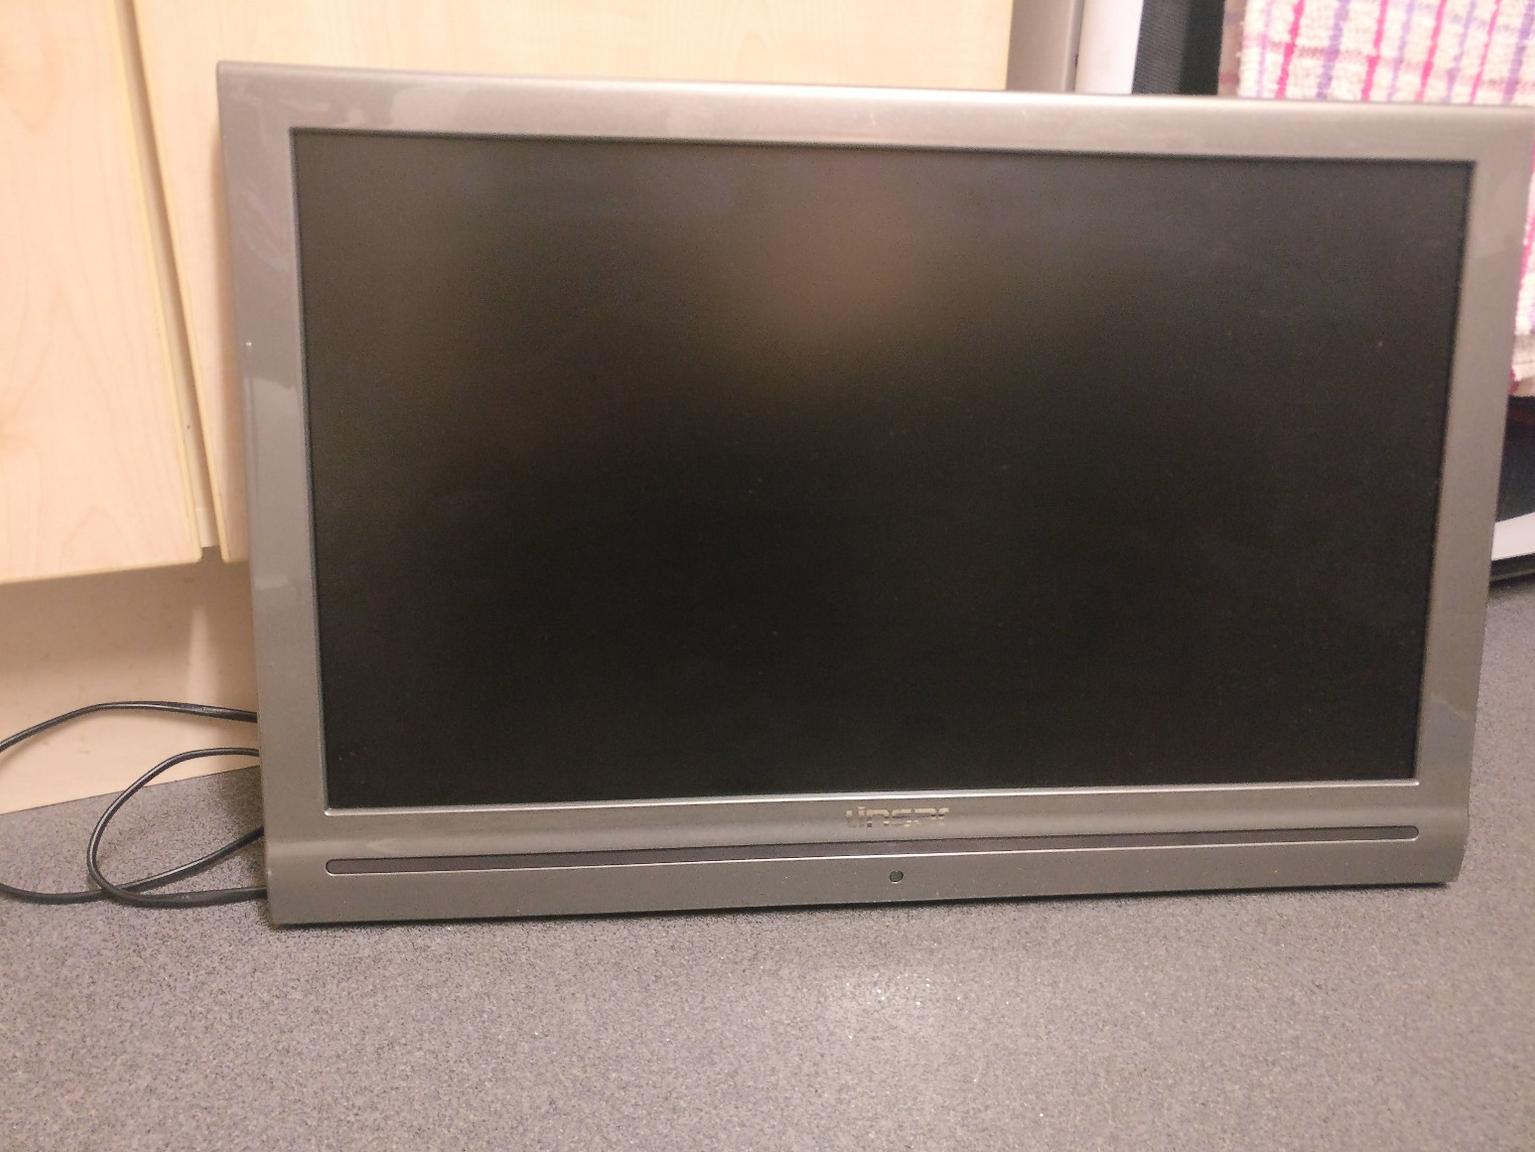 Linsar Flat Screen Dvd Tv In N21 Enfield For 40 00 For Sale Shpock